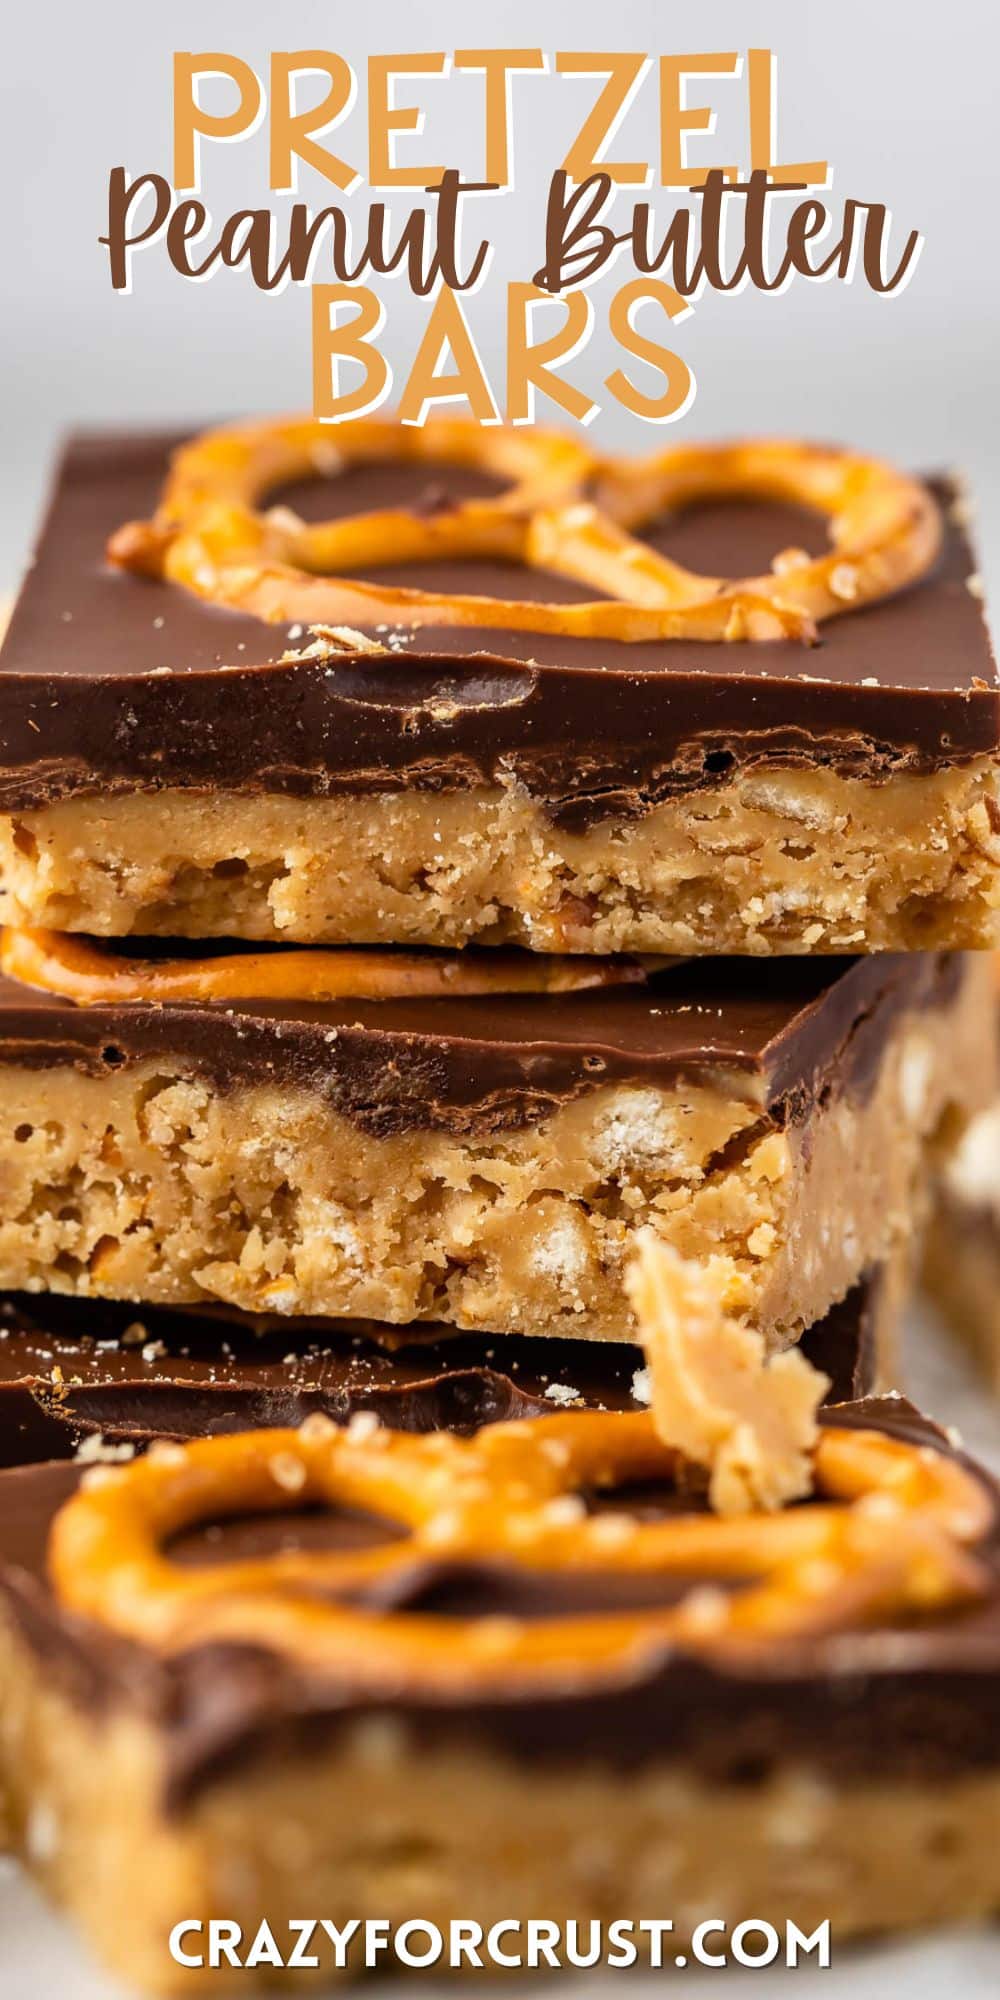 stacked peanut butter bars with a layer of chocolate on top with a pretzel with words on the image.